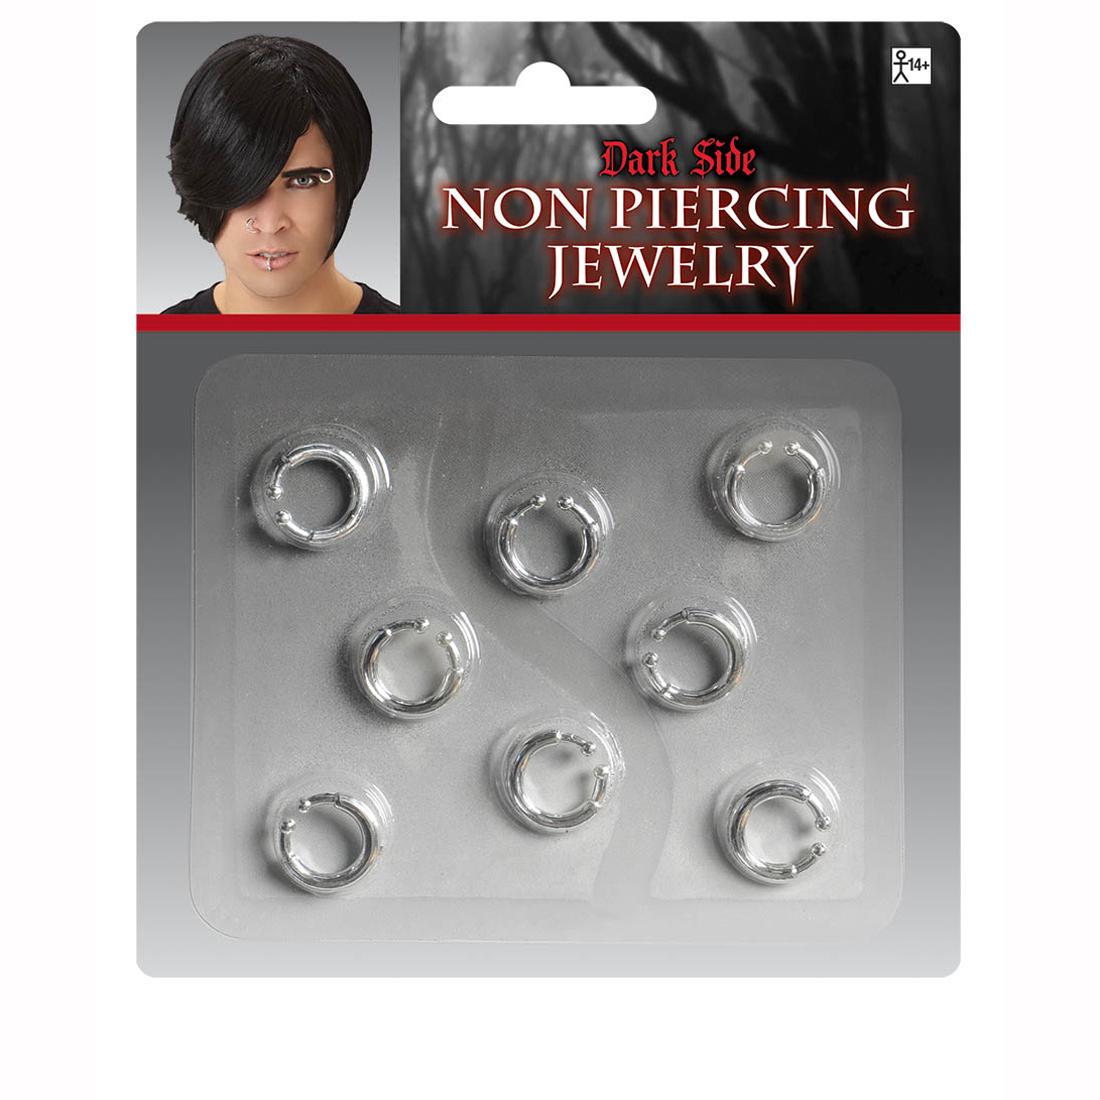 Non Piercing Jewelry Costumes & Apparel - Party Centre - Party Centre